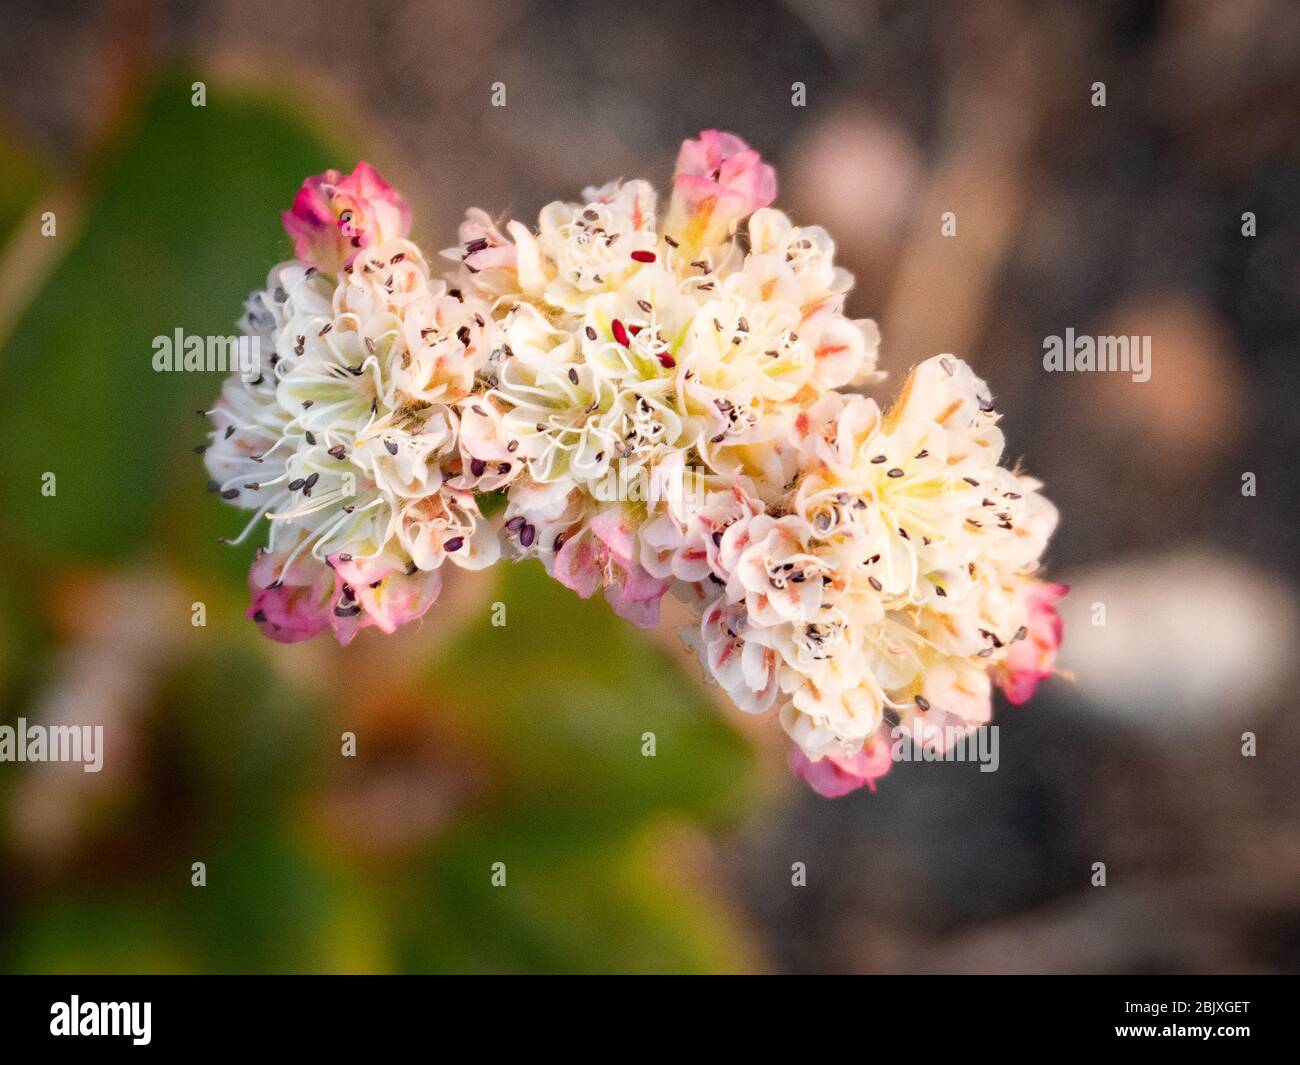 A cluster of tiny white and pink flowers. Stock Photo